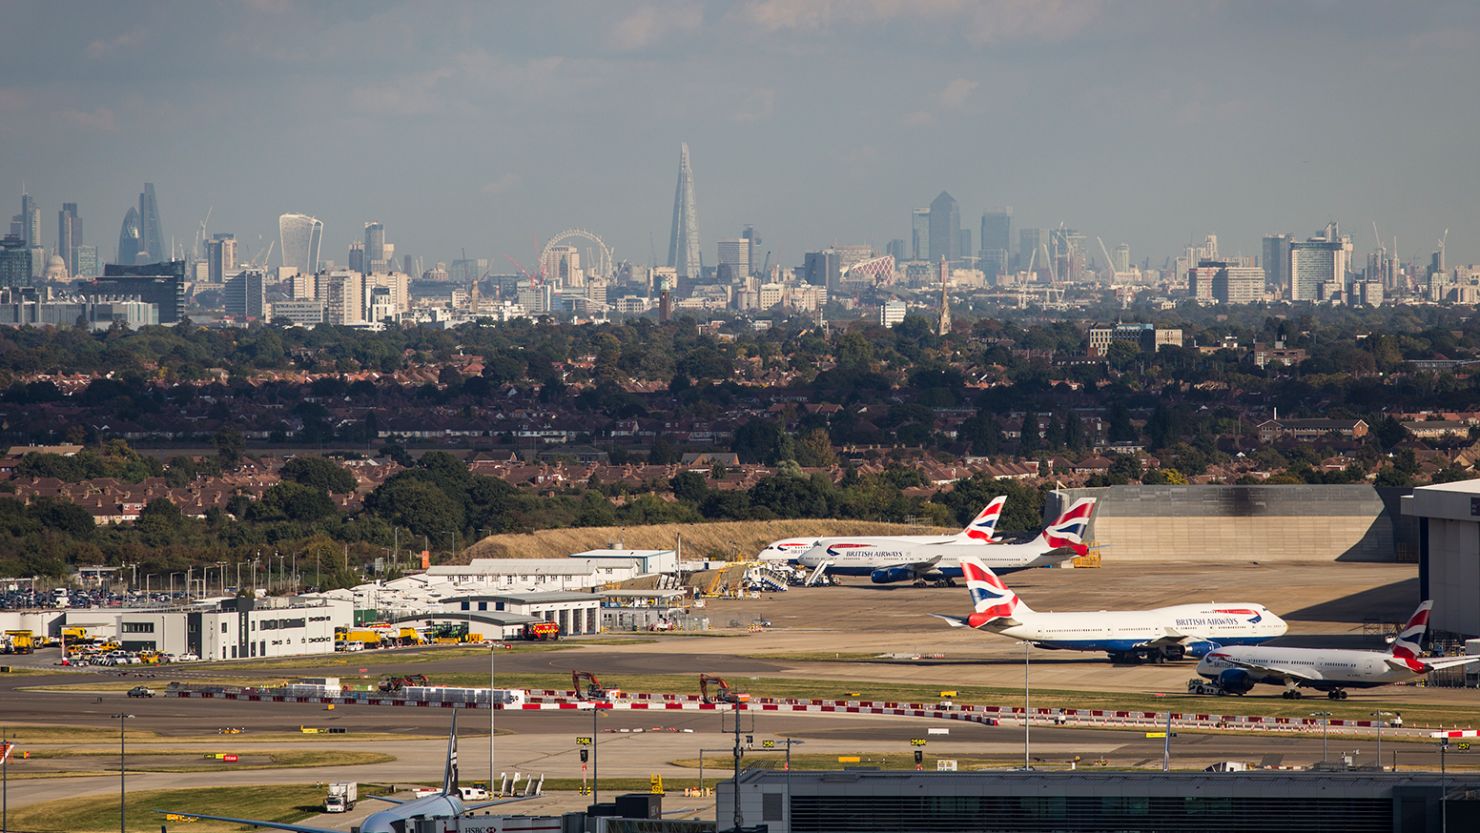 A general view of aircraft at Heathrow Airport in front of the London skyline on October 11, 2016 in London, England.